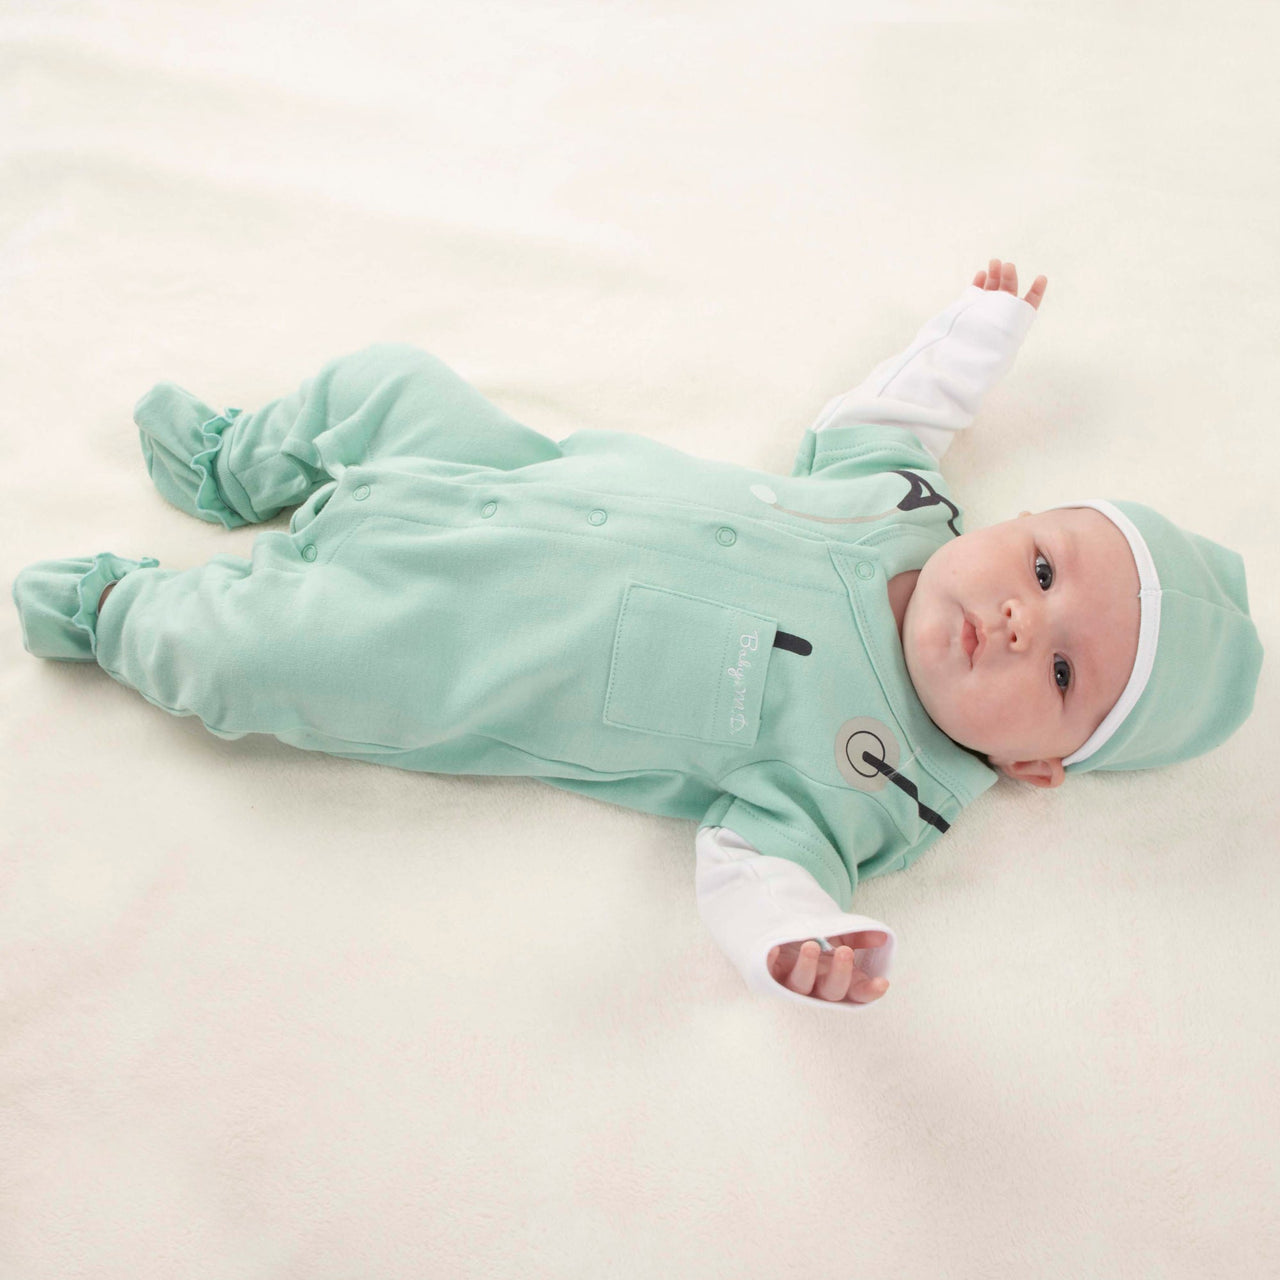 Big Dreamzzz Baby M.D. 3-Piece Layette Set in "Doctor's Bag" Gift Box (Personalization Available)